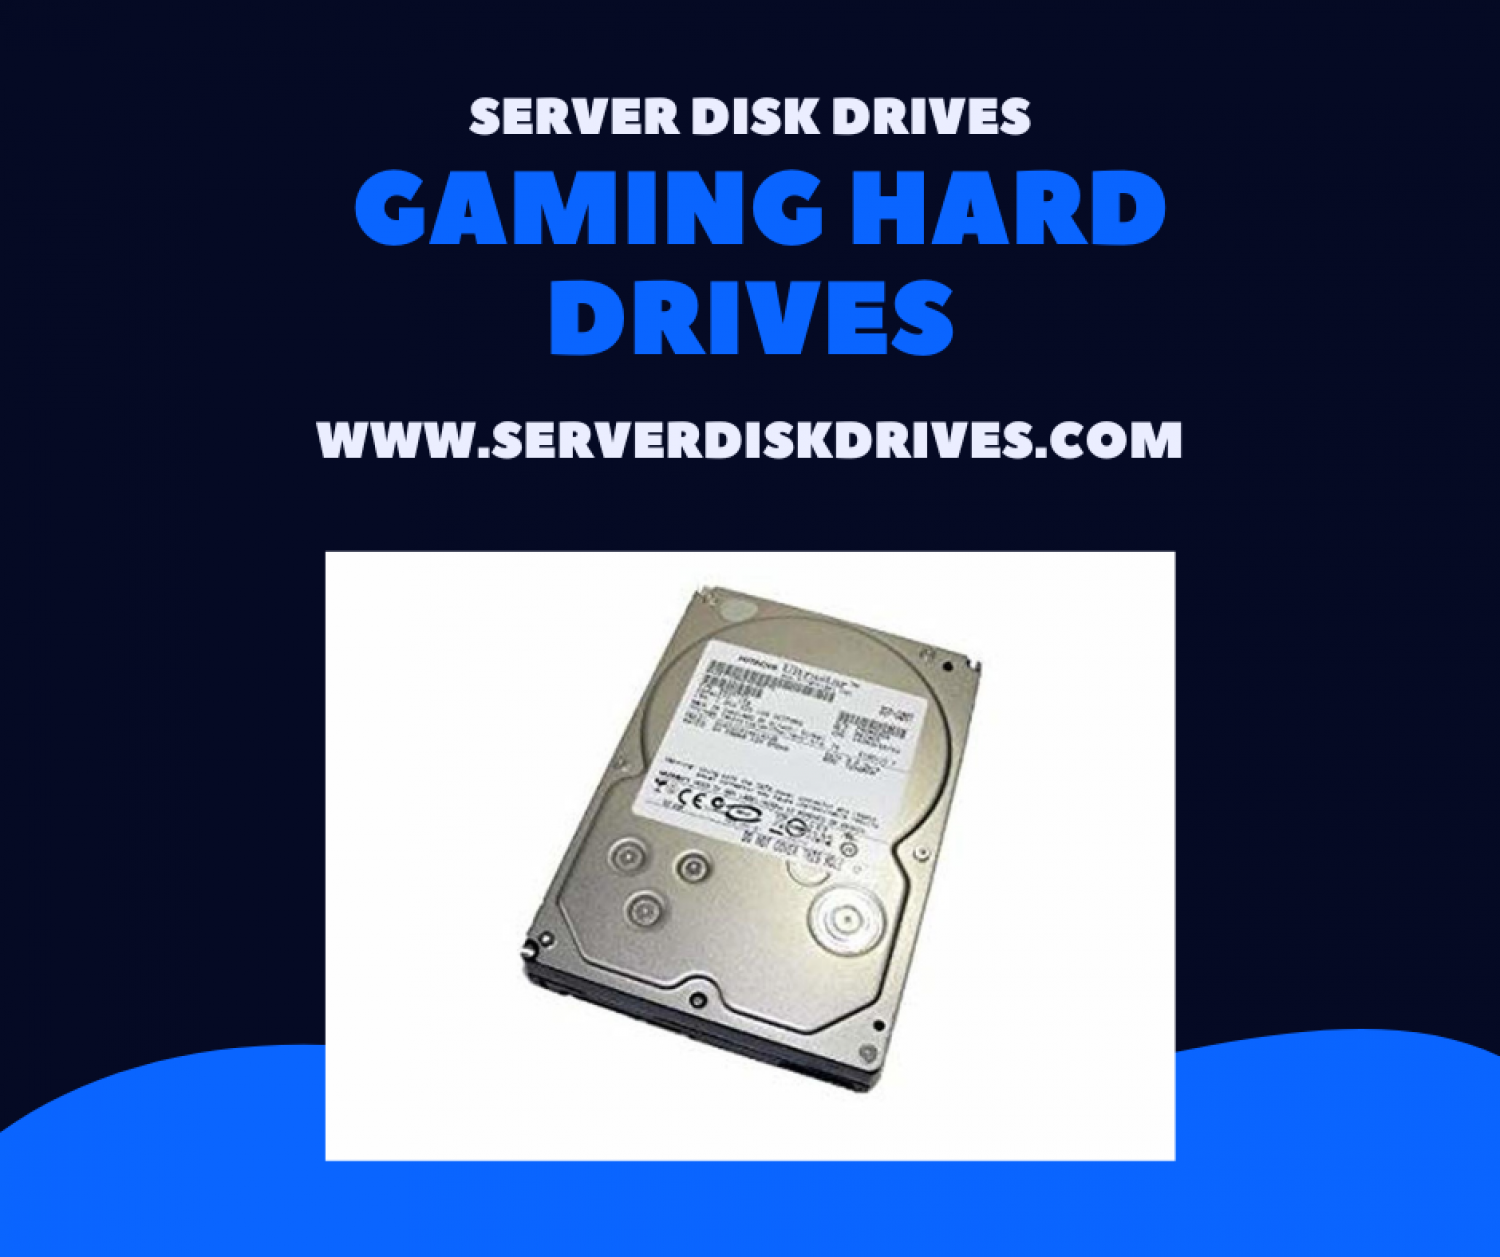 Buy Online Gaming Hard Drives Infographic